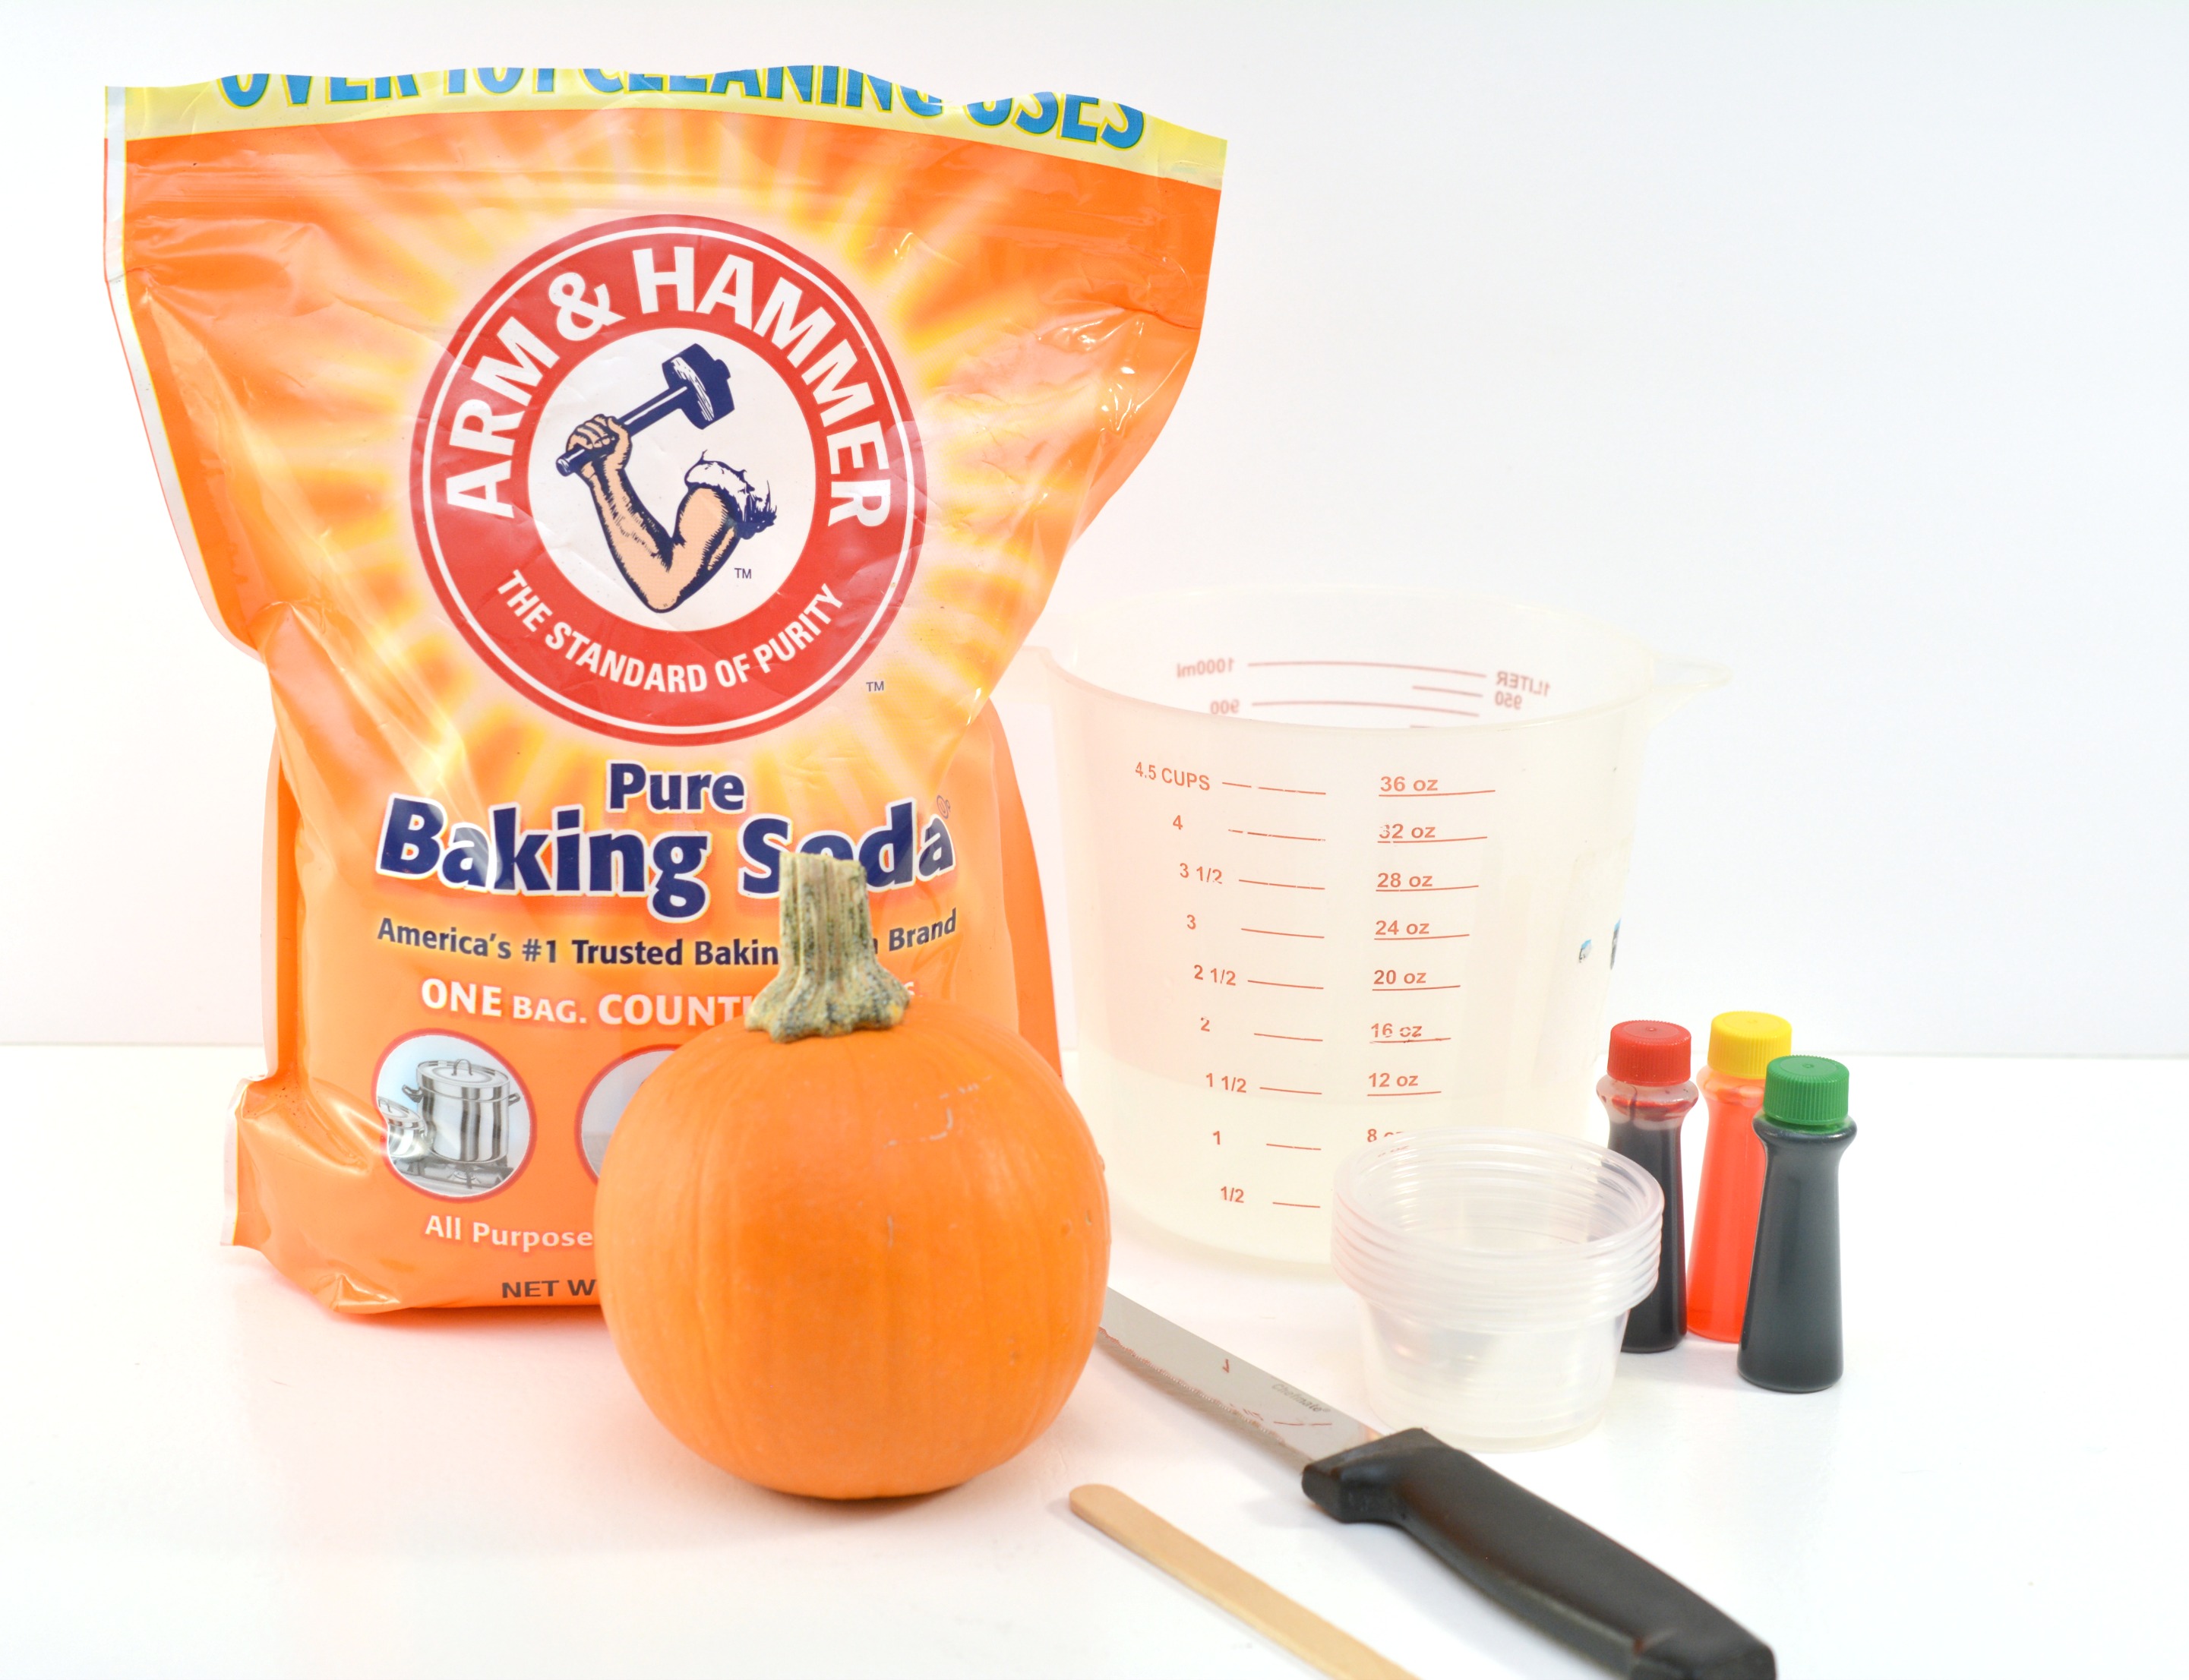 THE BEST Pumpkin Science Experiments and Pumpkin Volcano for Kids. Your Kids will love this exploding pumpkin experiment. Science Activities and Pumpkin Science Experiments are perfect for a fall theme for preschool and kindergarten, Add this Pumpkin Science to your Kids Science Table or Pumpkin Lesson Plans this fall. 